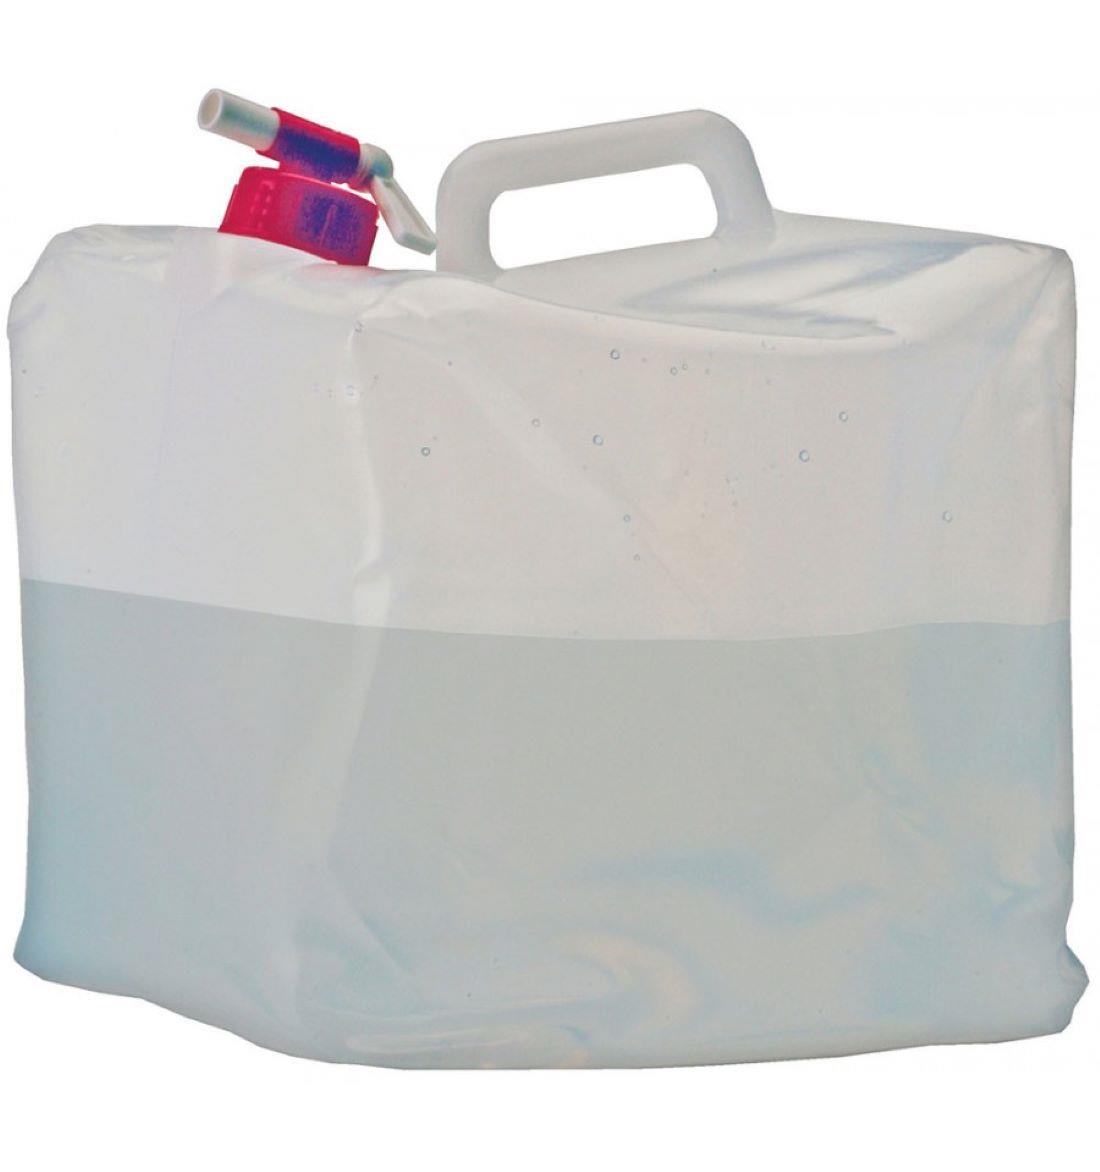 Vango Square Water Carrier - 15 litre